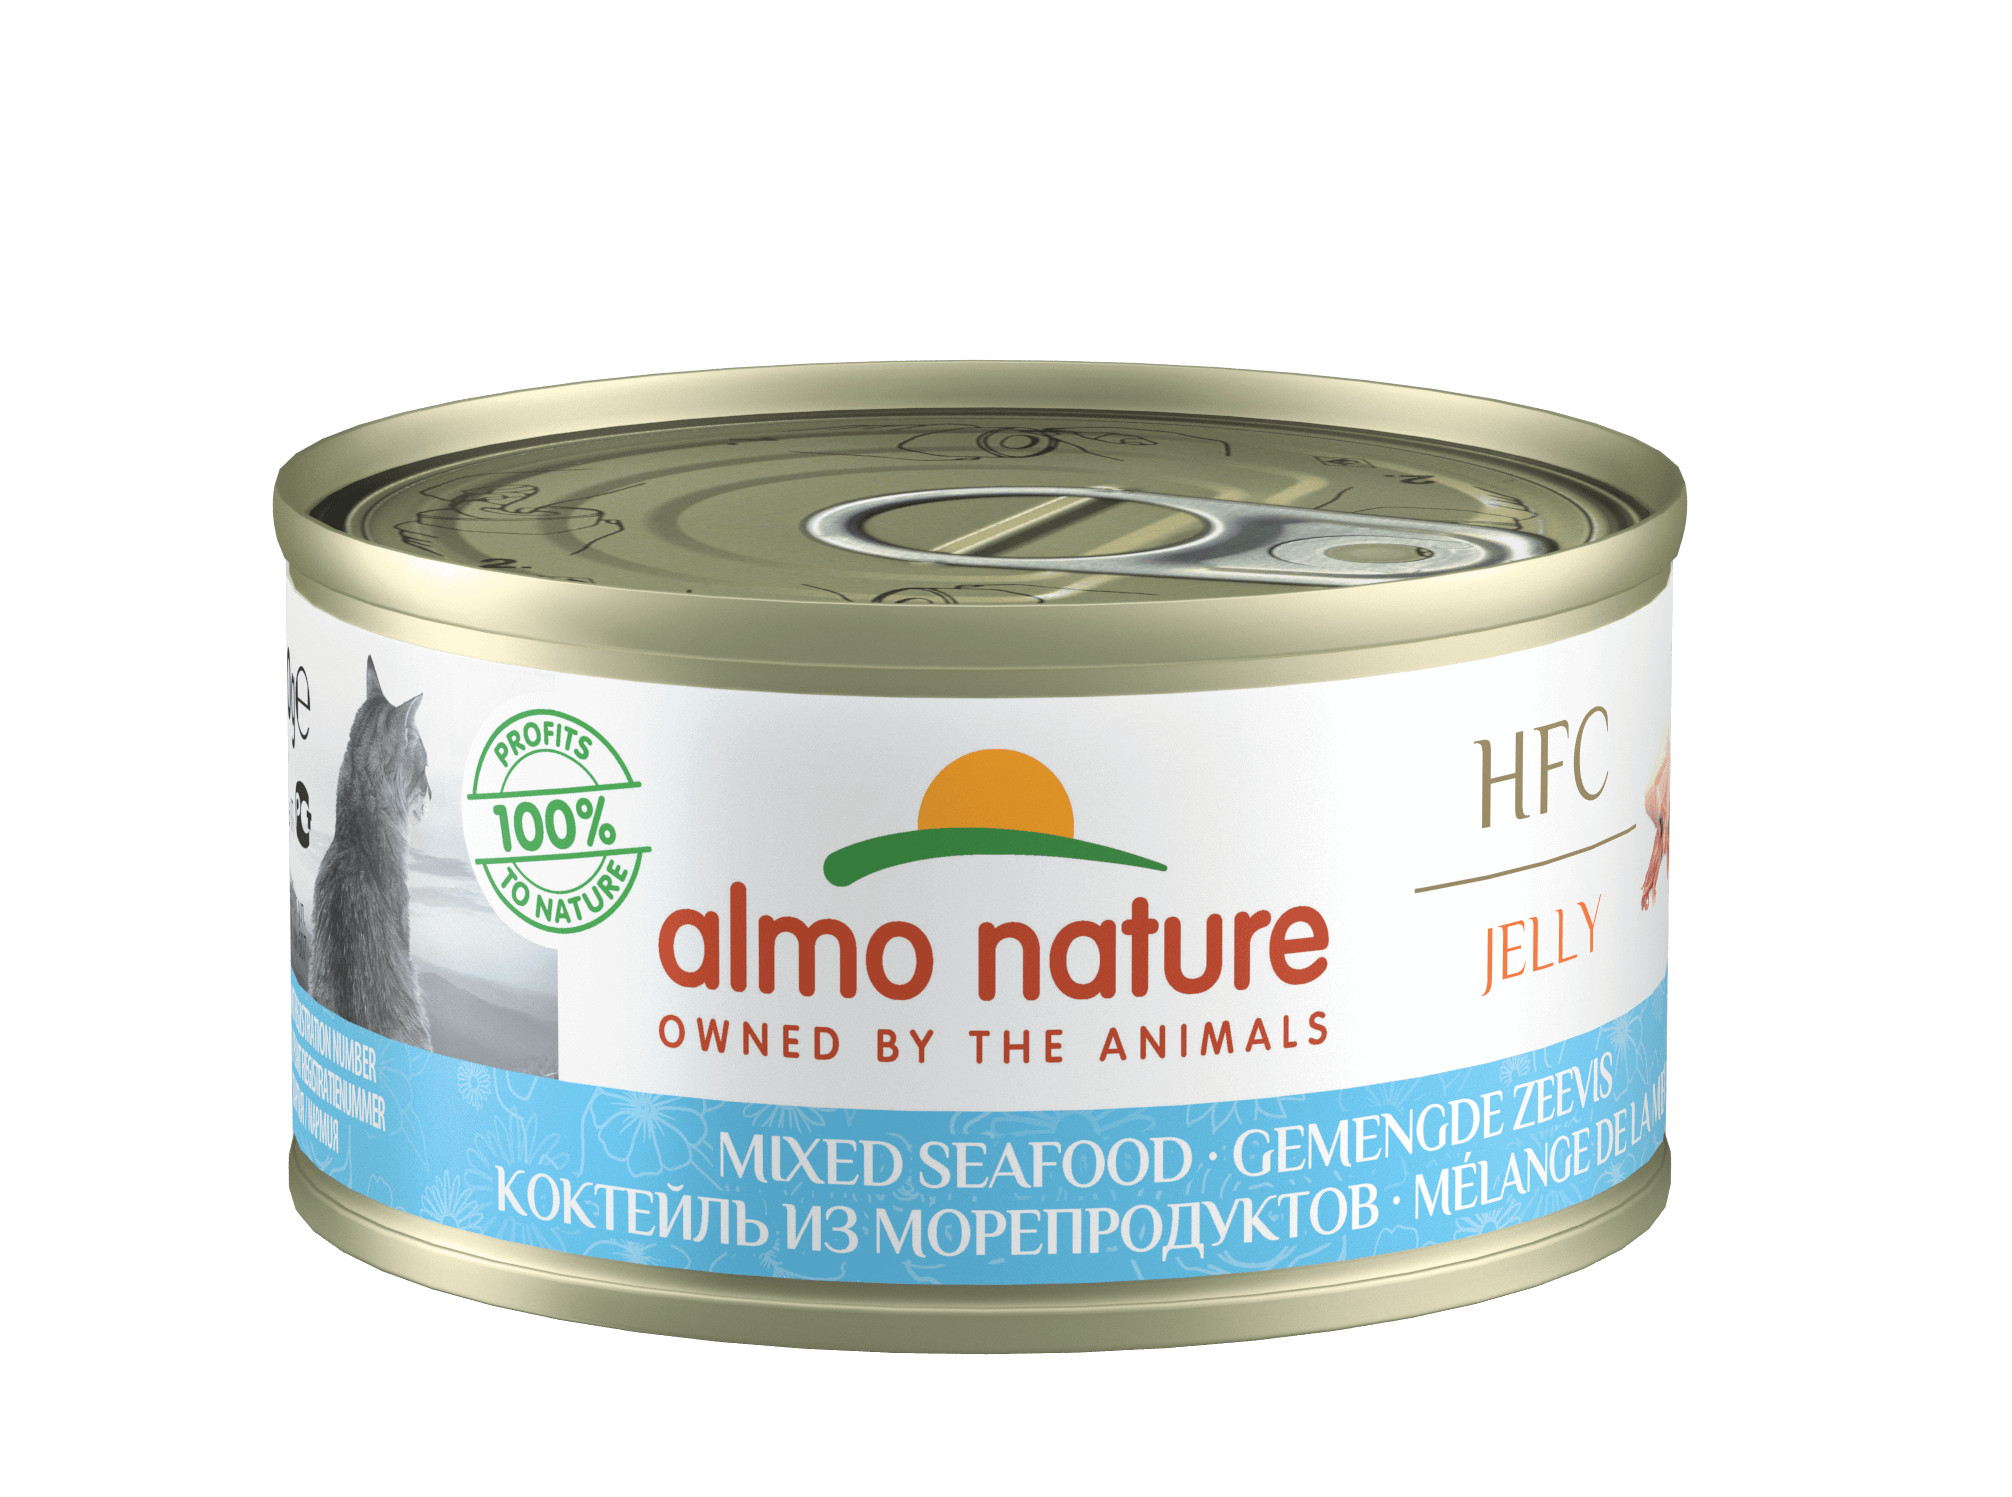 Almo Nature HFC Jelly Seafood kattefoder